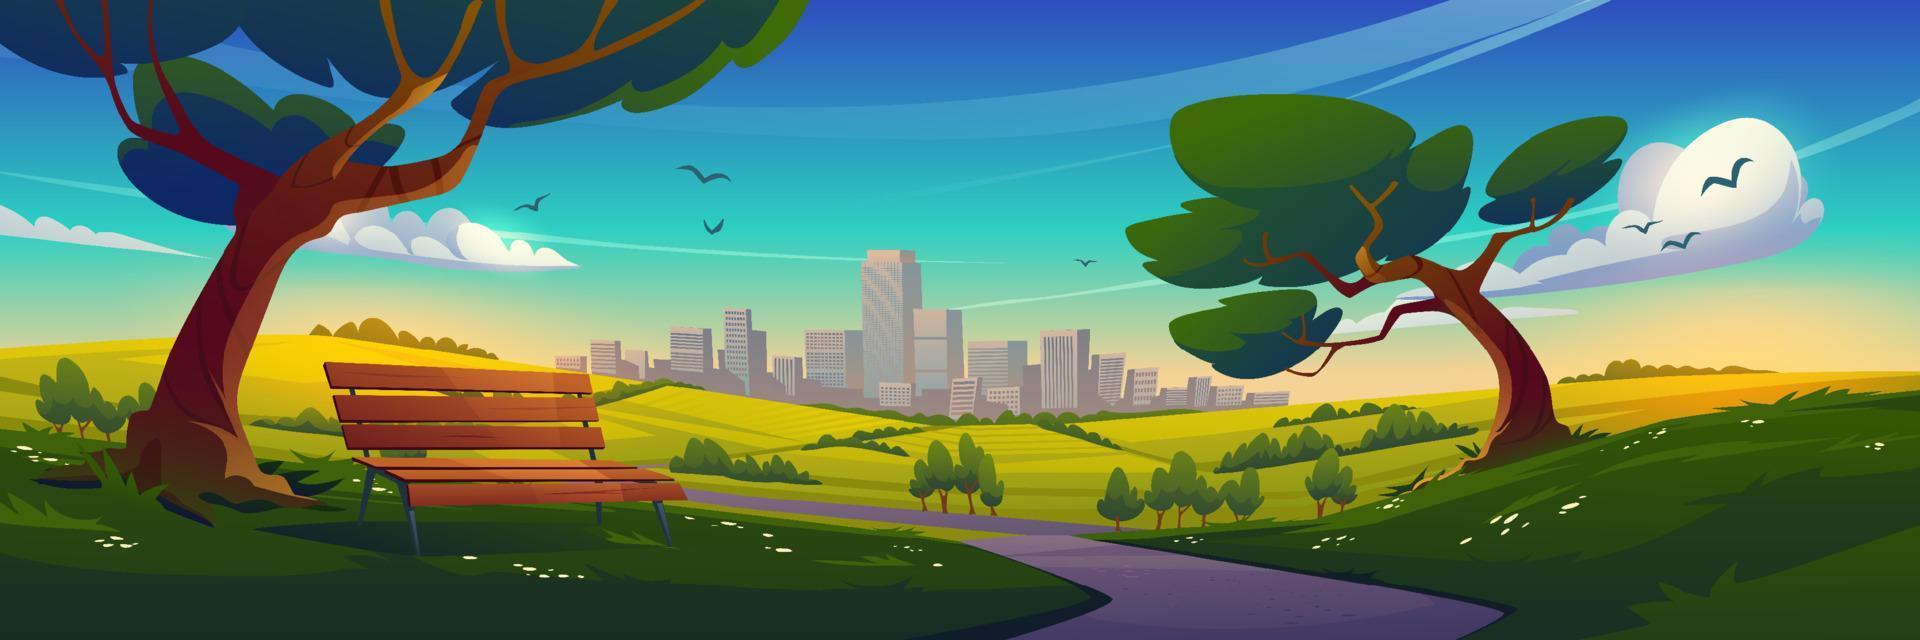 Suburban landscape with bench and urban skyline vector